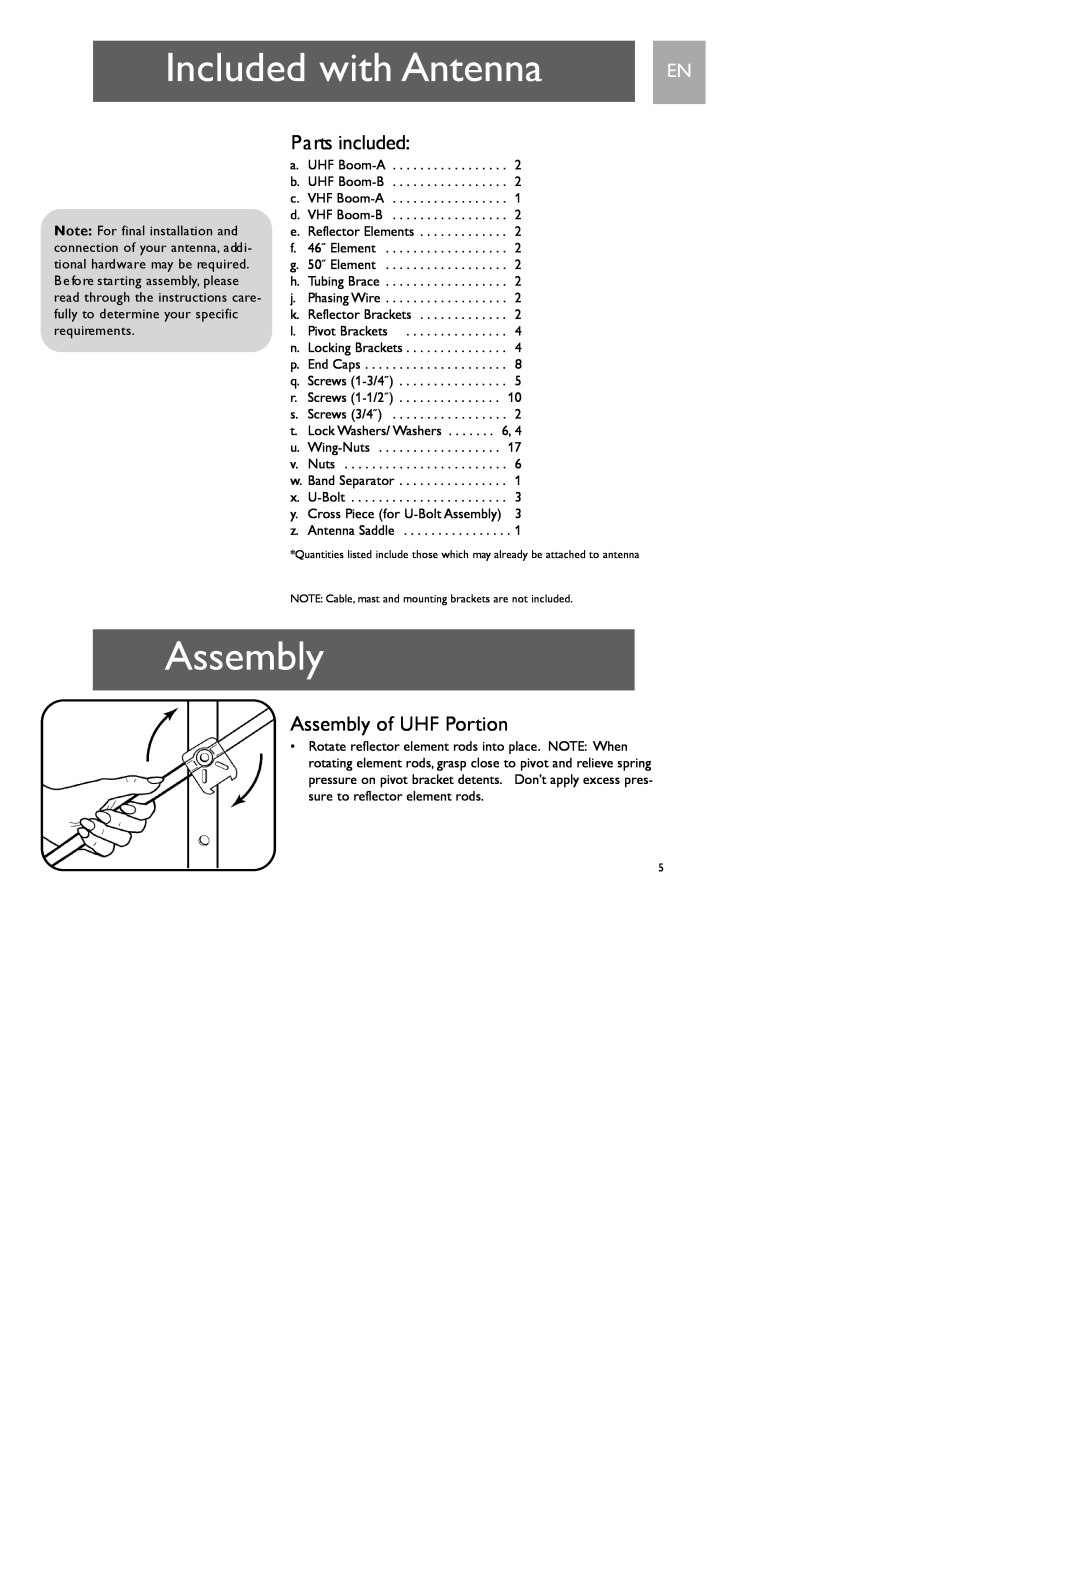 Philips SDV7700K/17 user manual Included with Antenna, Parts included, Assembly of UHF Portion 